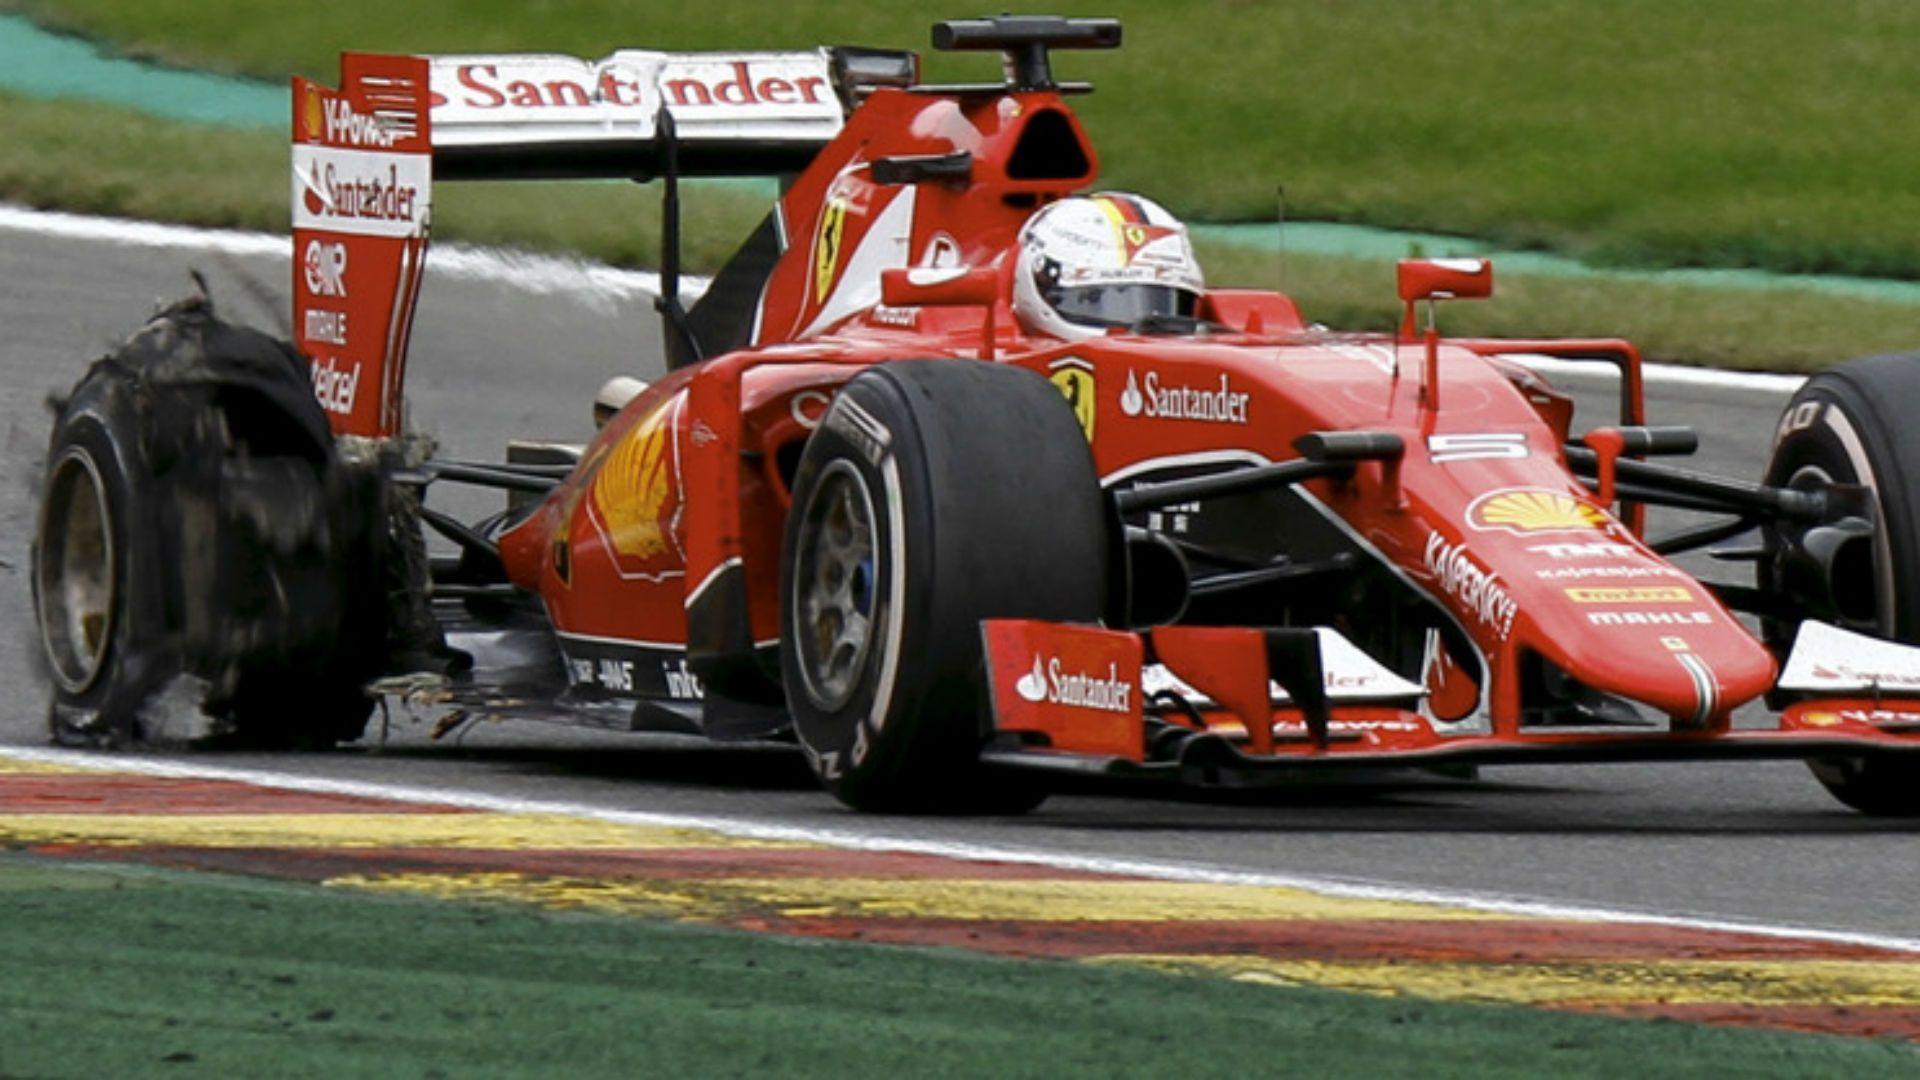 Conclusions from the Belgian GP